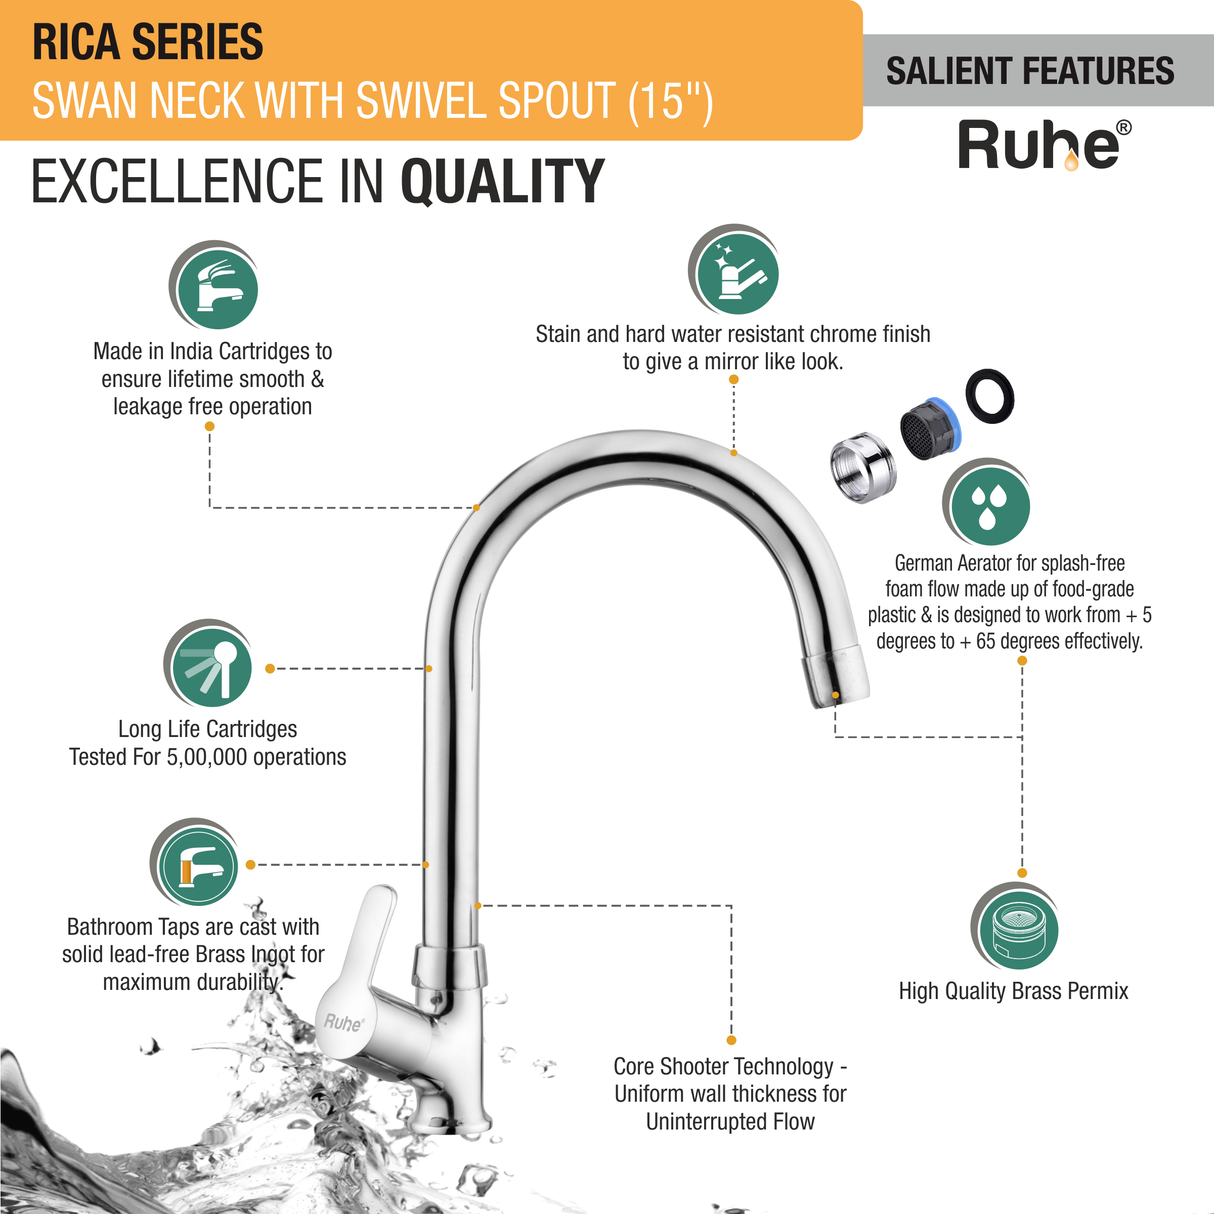 Rica Swan Neck with Medium (15 inches) Round Swivel Spout Faucet features